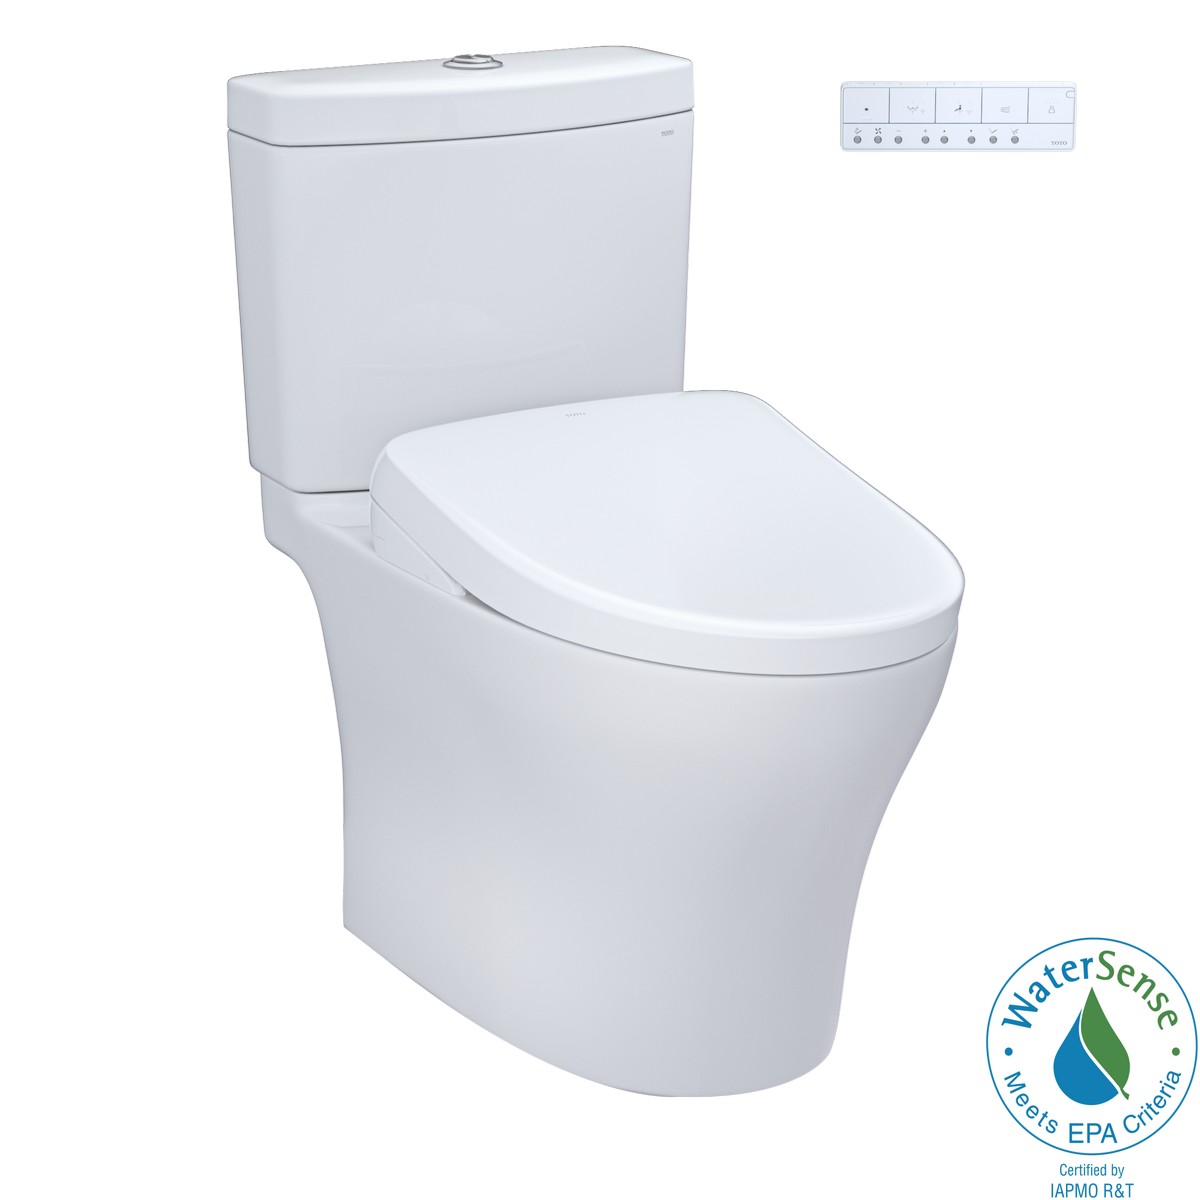 TOTO MW4464736CEMG#01 T40 WASHLET+ AQUIA IV 1.28 AND 0.9 GPF TWO PIECE DUAL FLUSH ELONGATED TOILET WITH WASHLET S7A BIDET SEAT IN COTTON WHITE